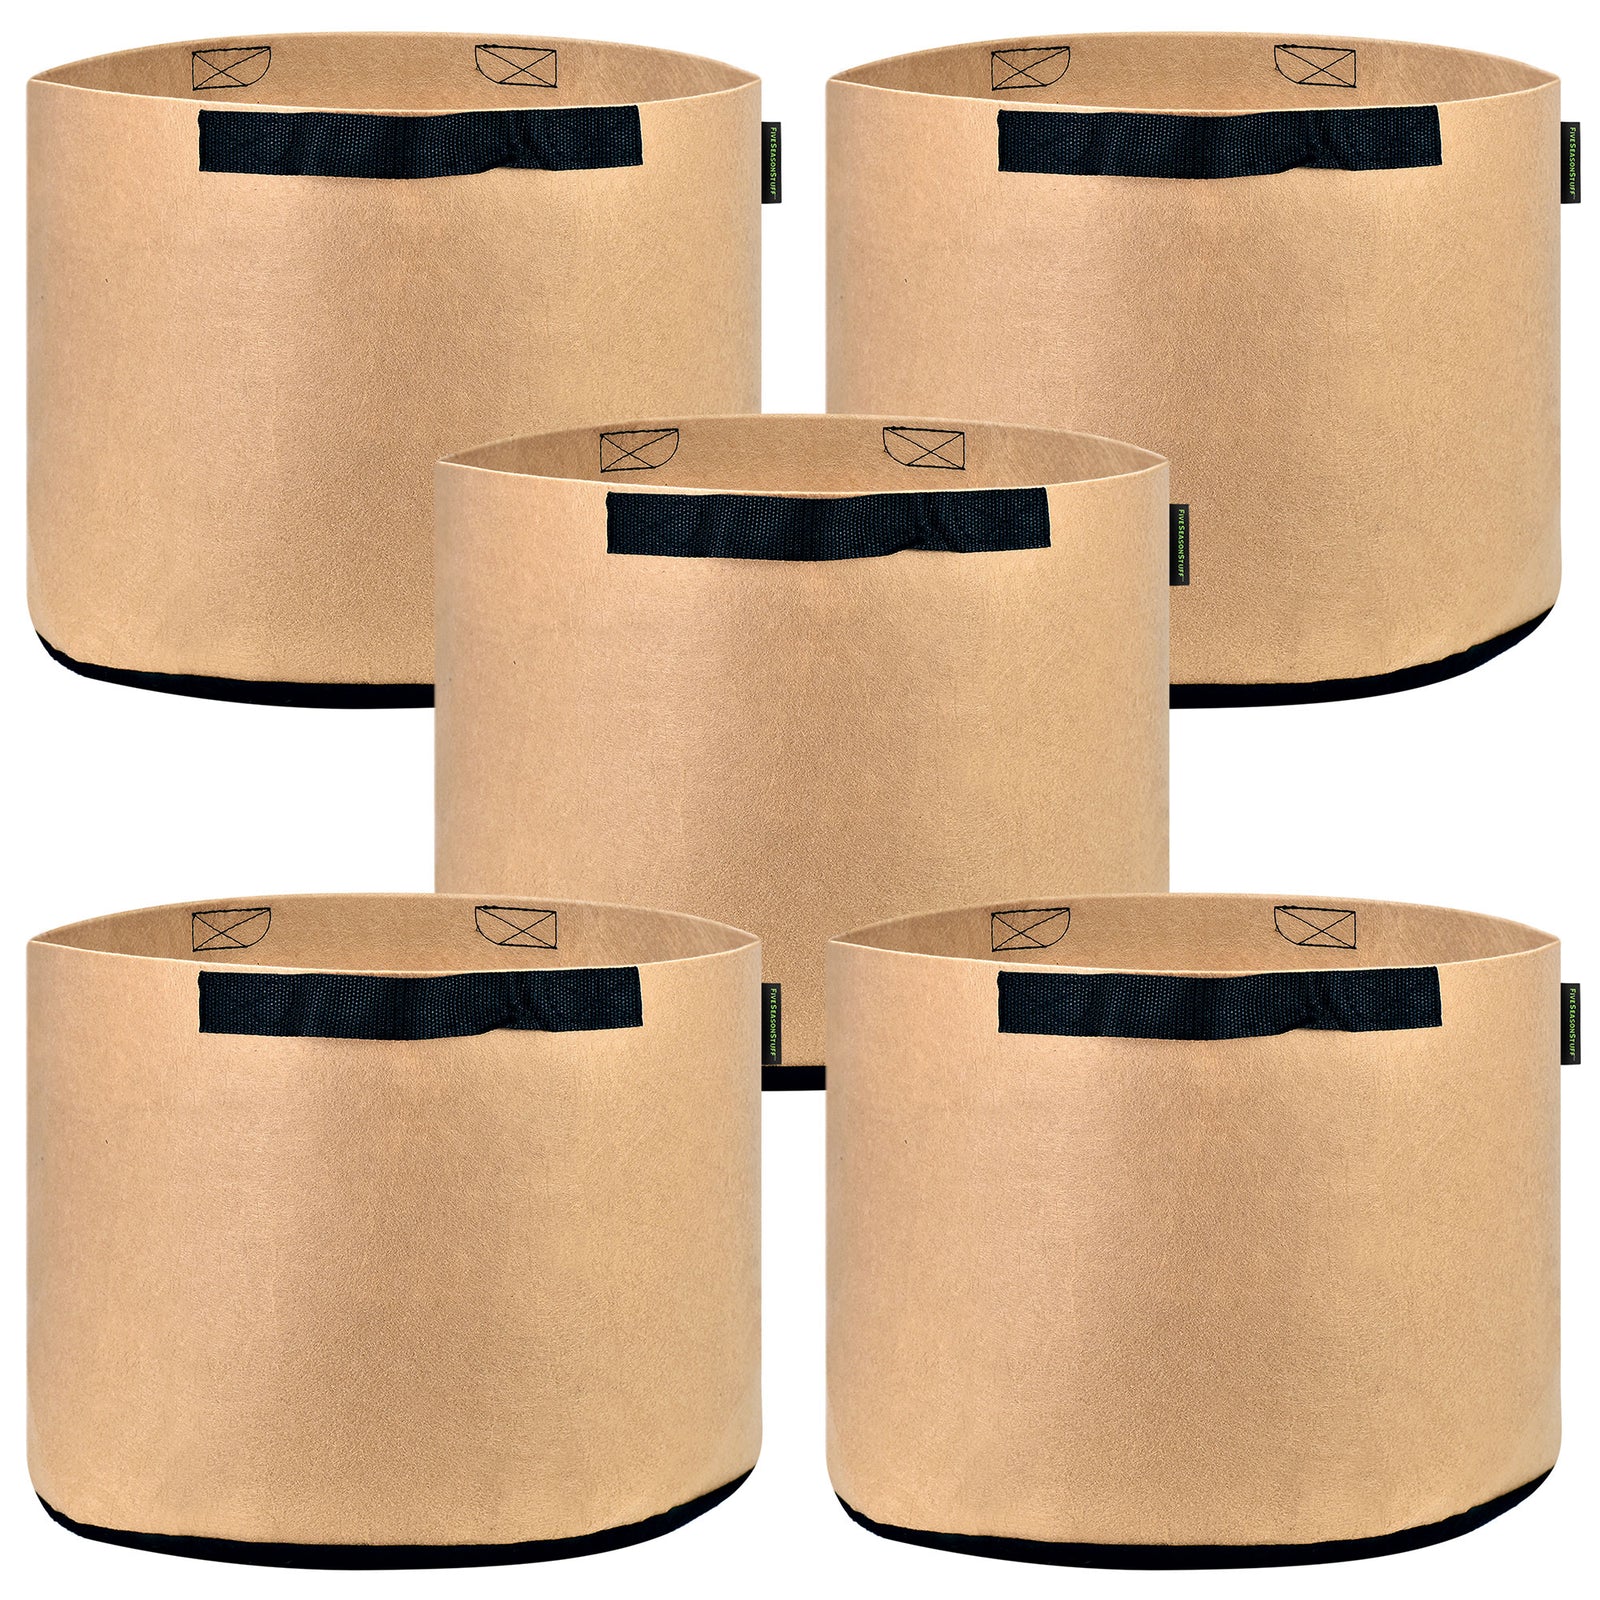 5 Pack 10 Gallons Grow Bags - Breathable Fabric Pots for Healthier Plants Vegetables Flowers – Heavy Duty Thick Containers with Sturdy Handles - Aeration Planters for Smart Gardening (Khaki)